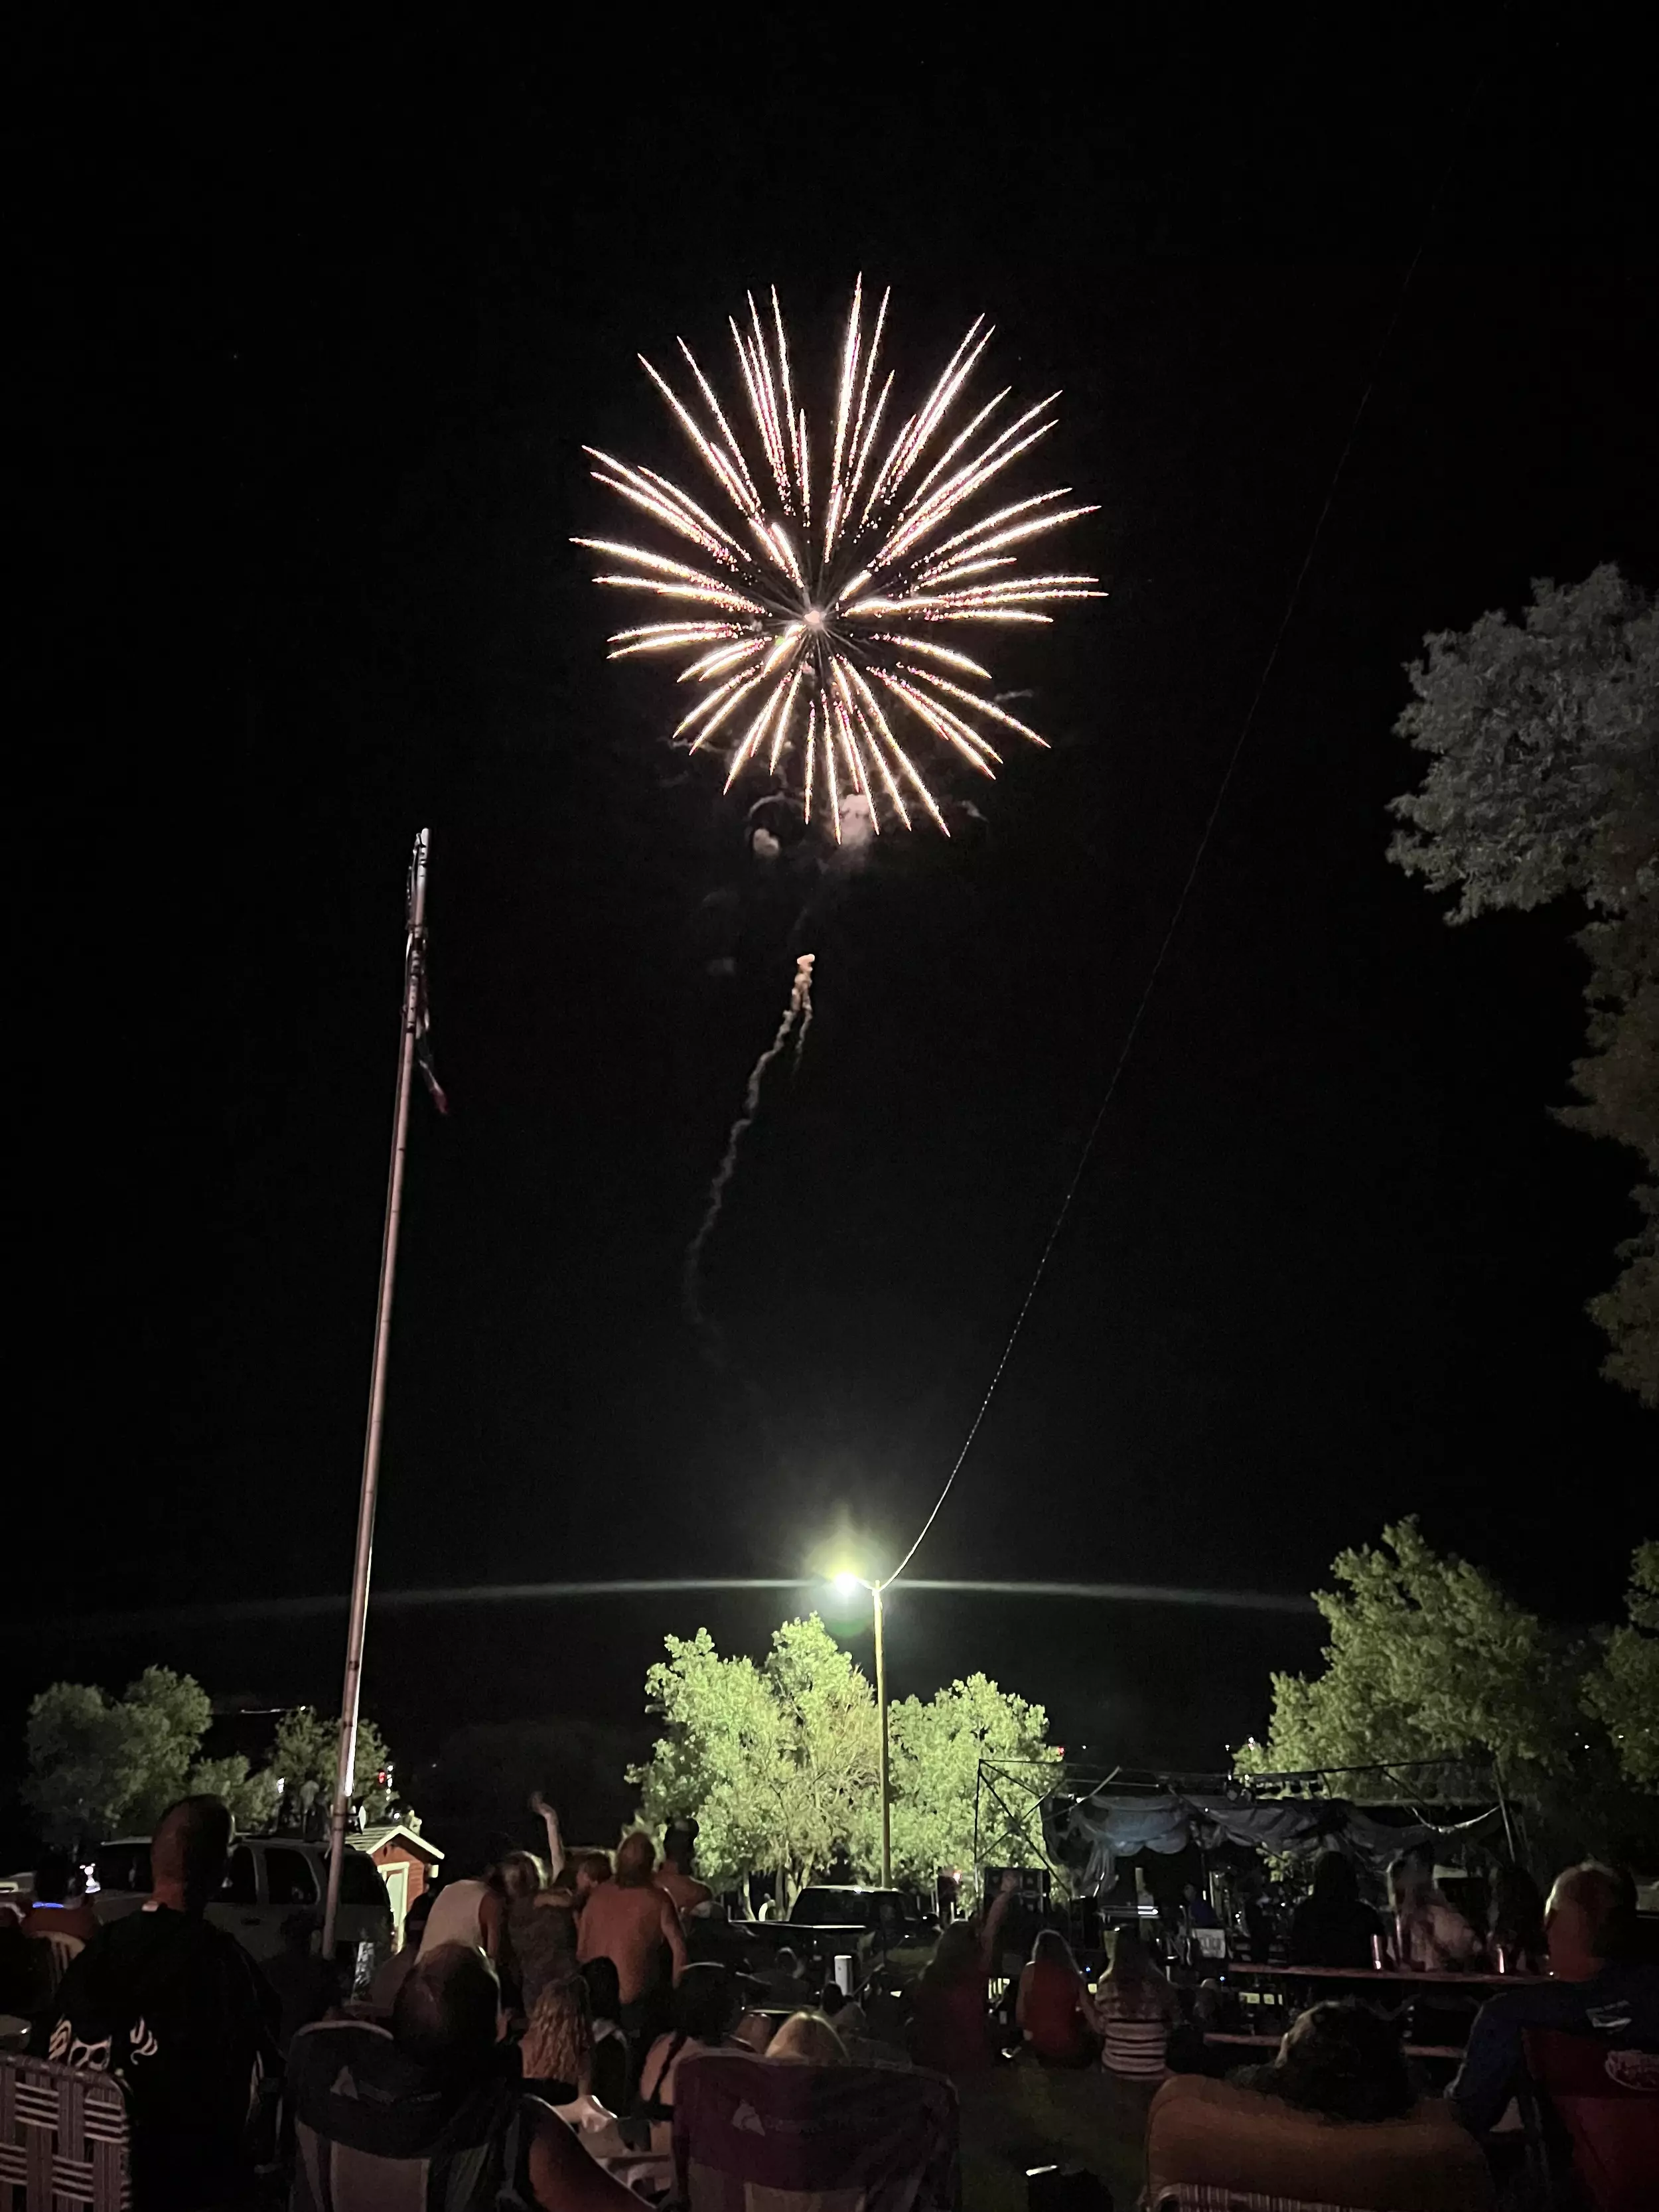 Check out the Firework Show at Alcova Lake